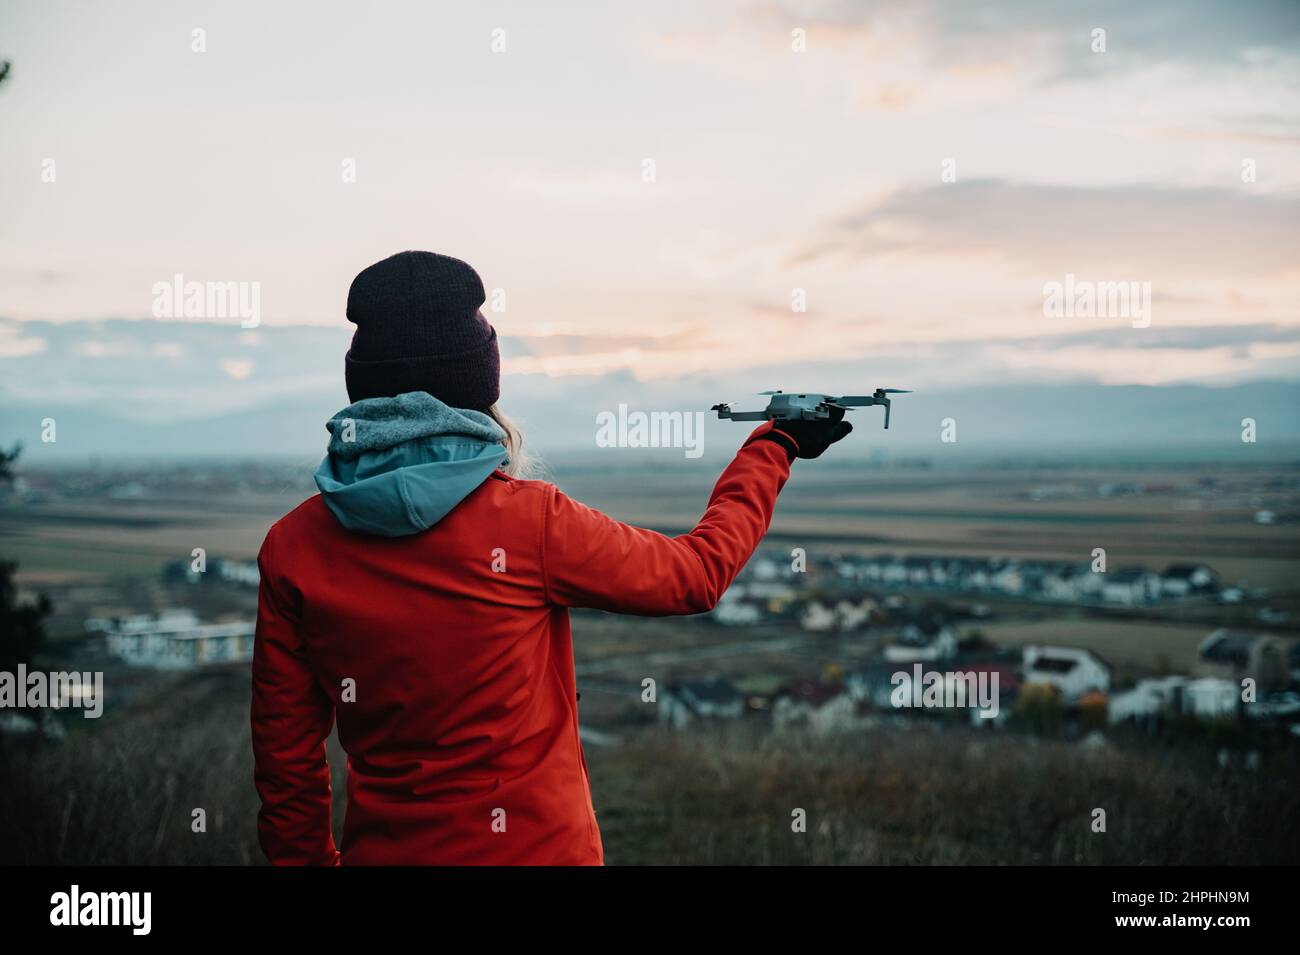 Female person holding a drone ready to take off from her hand Stock Photo